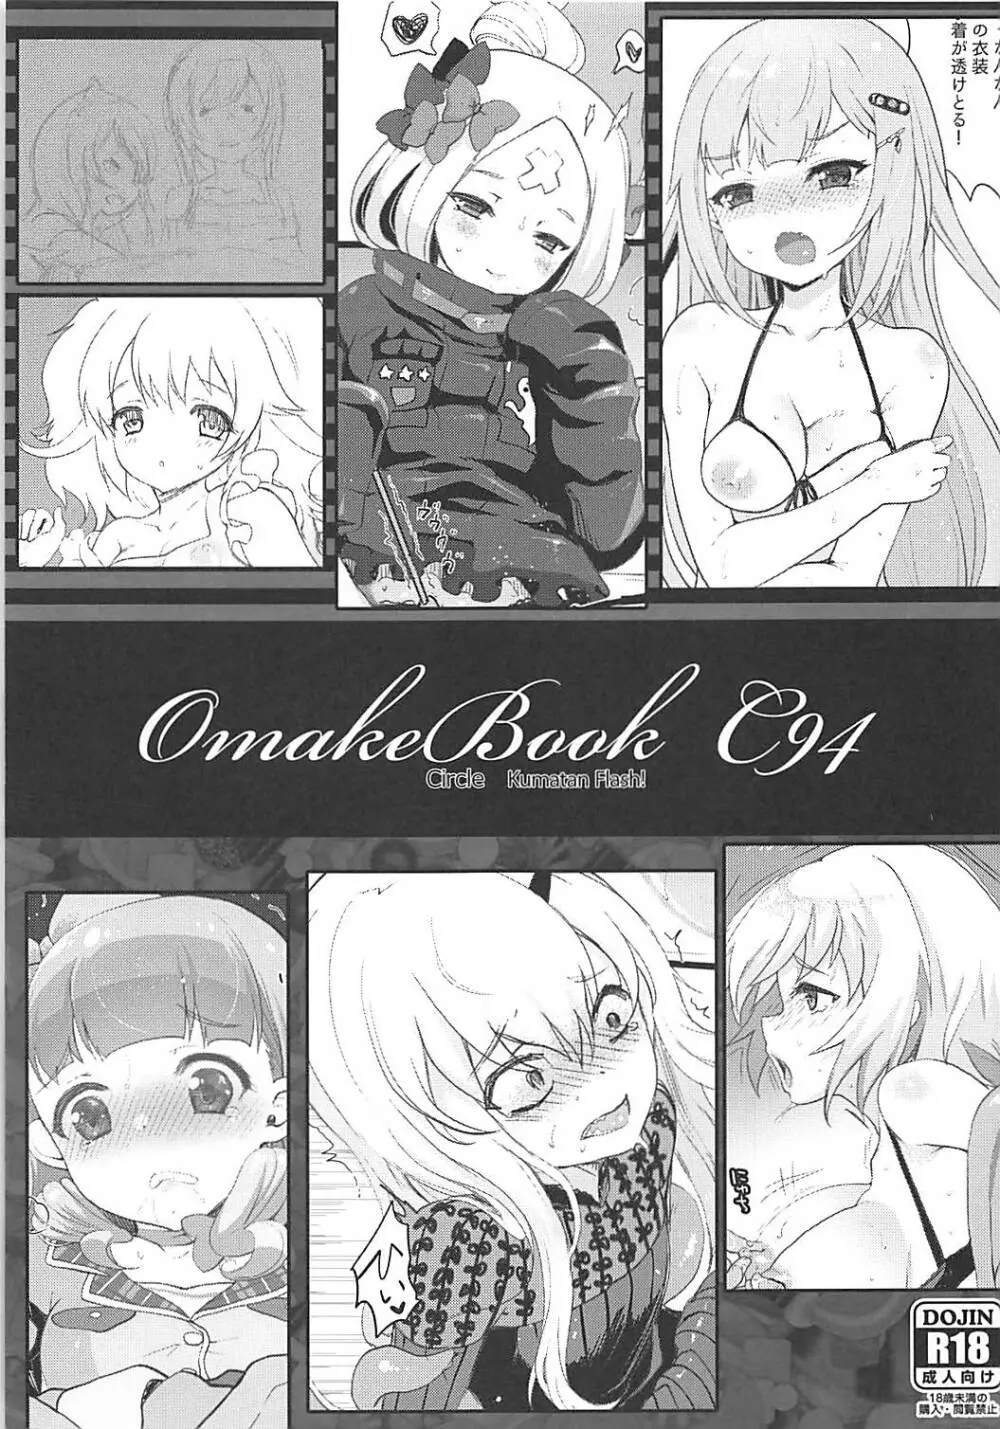 Omake Book C94 - page1